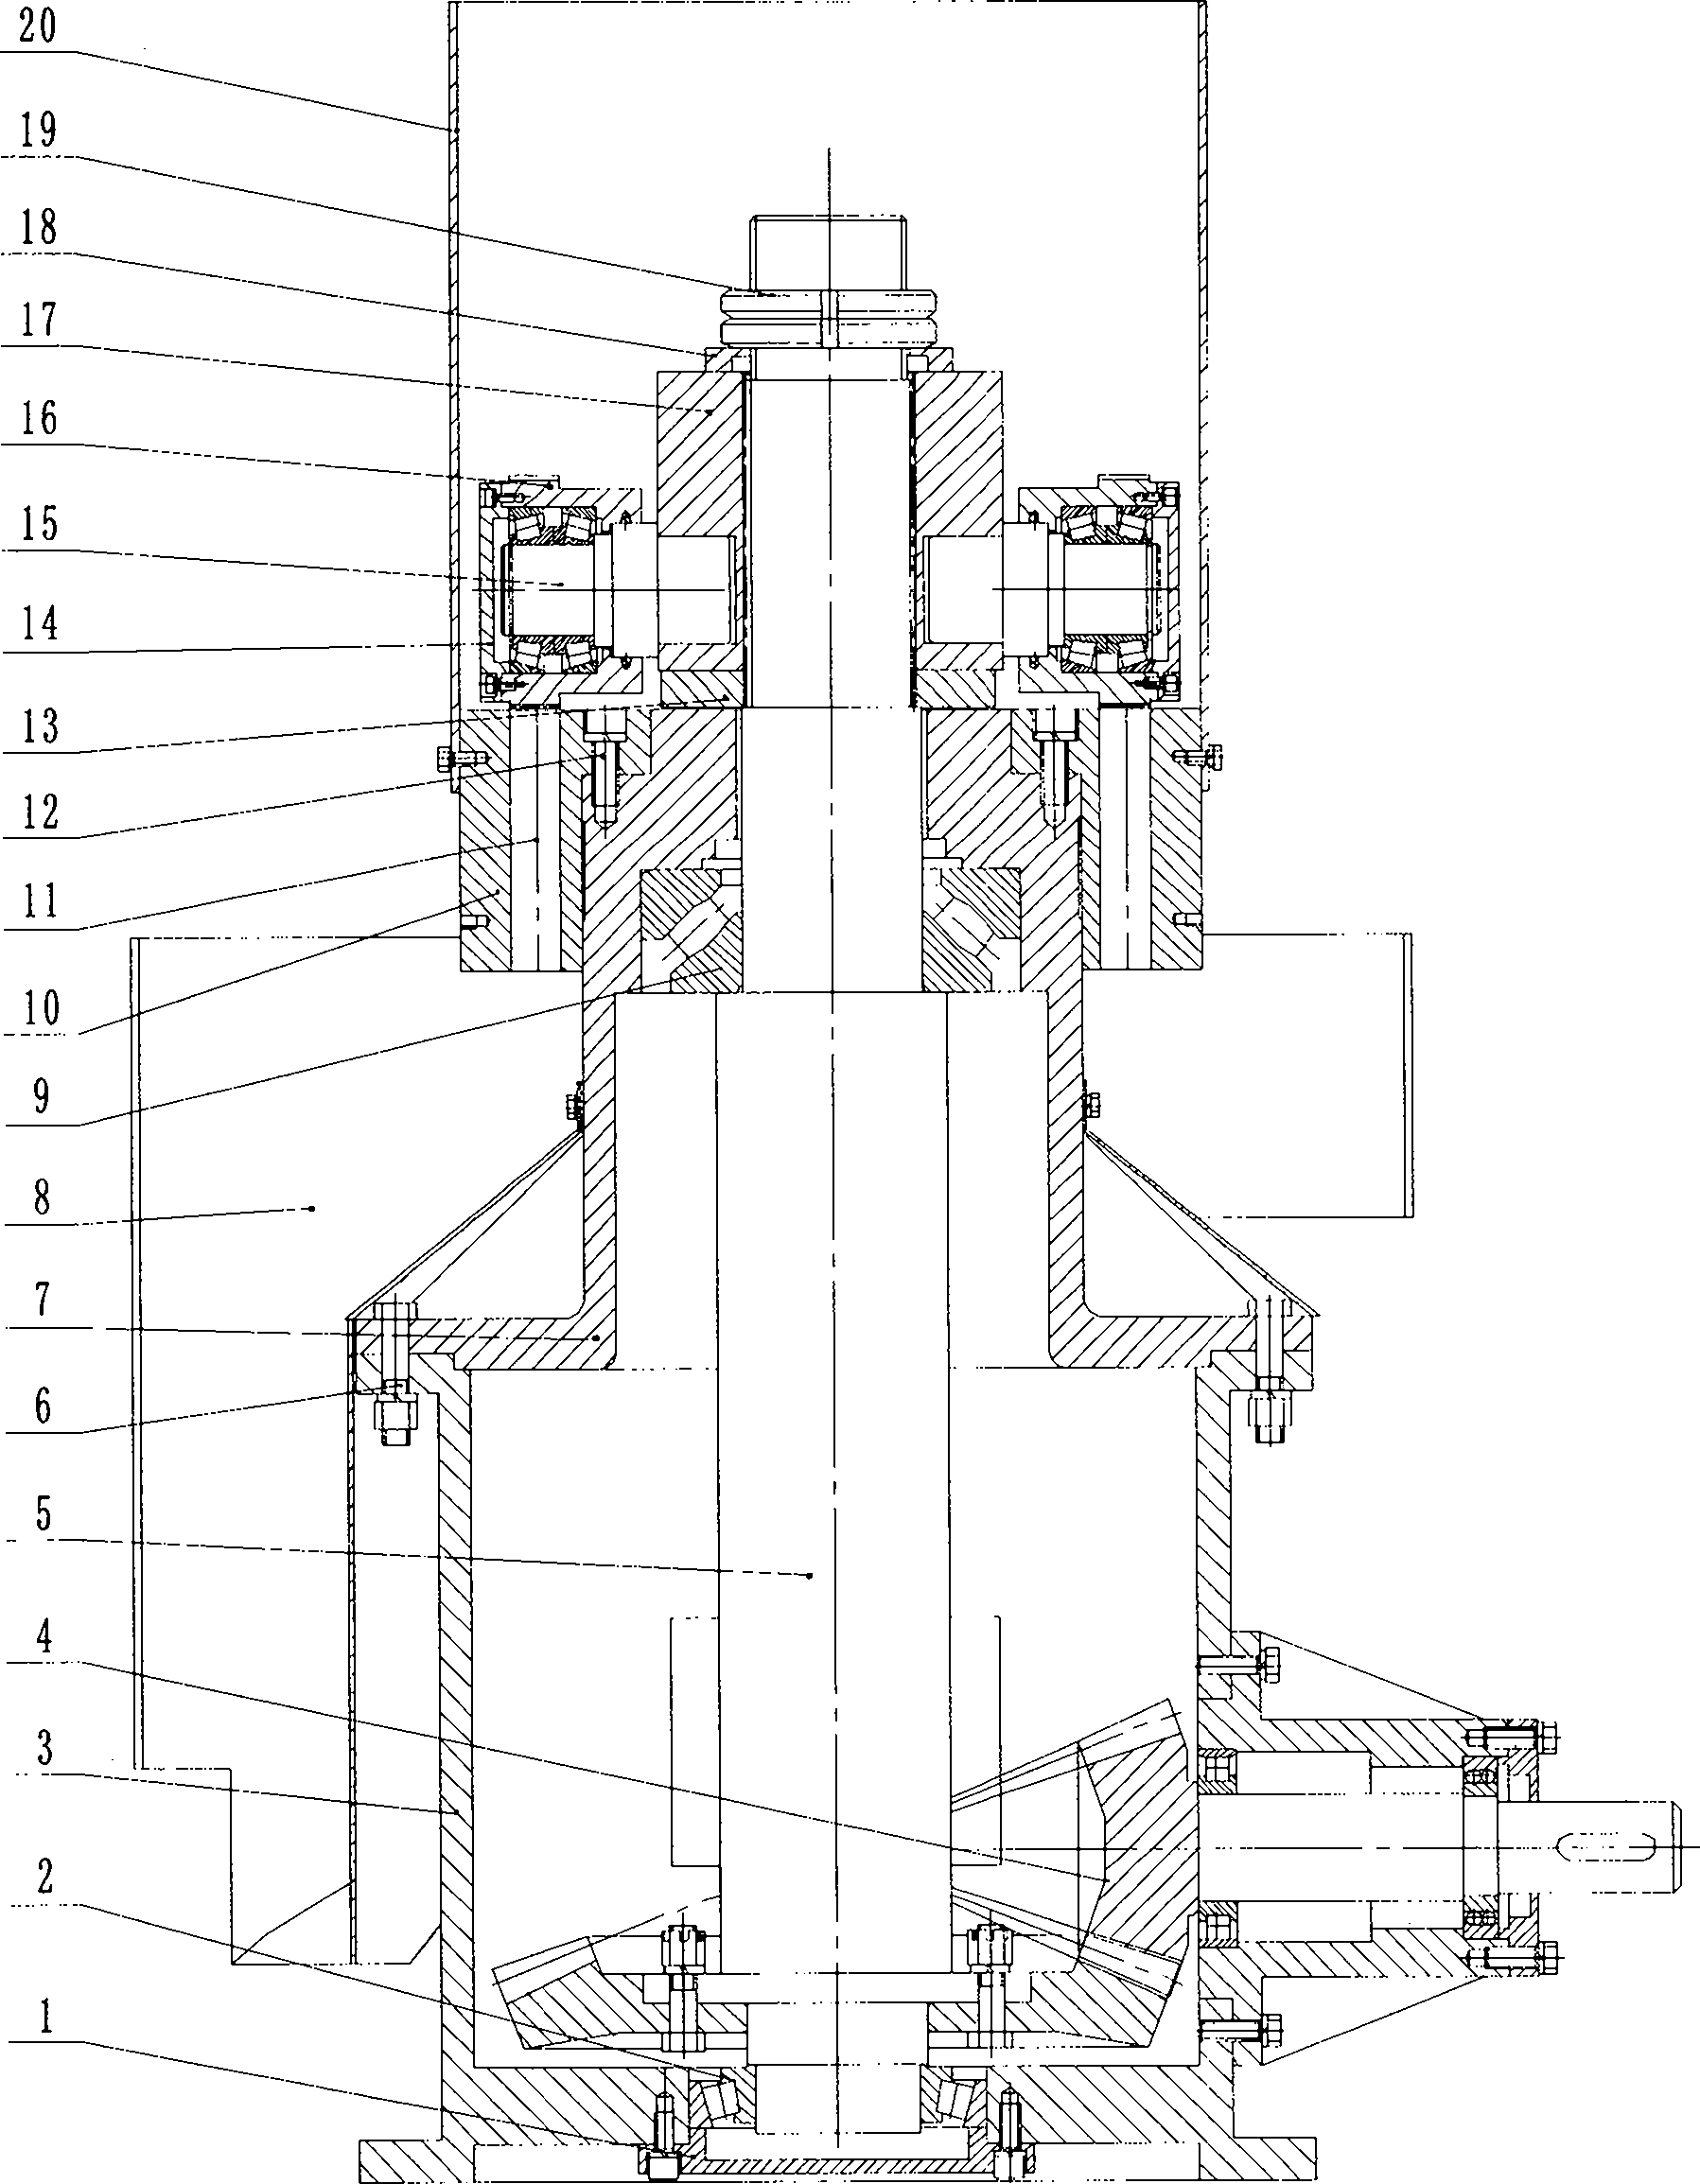 Straw briquetting mechanism with vertical shaft, flat die and straight roller